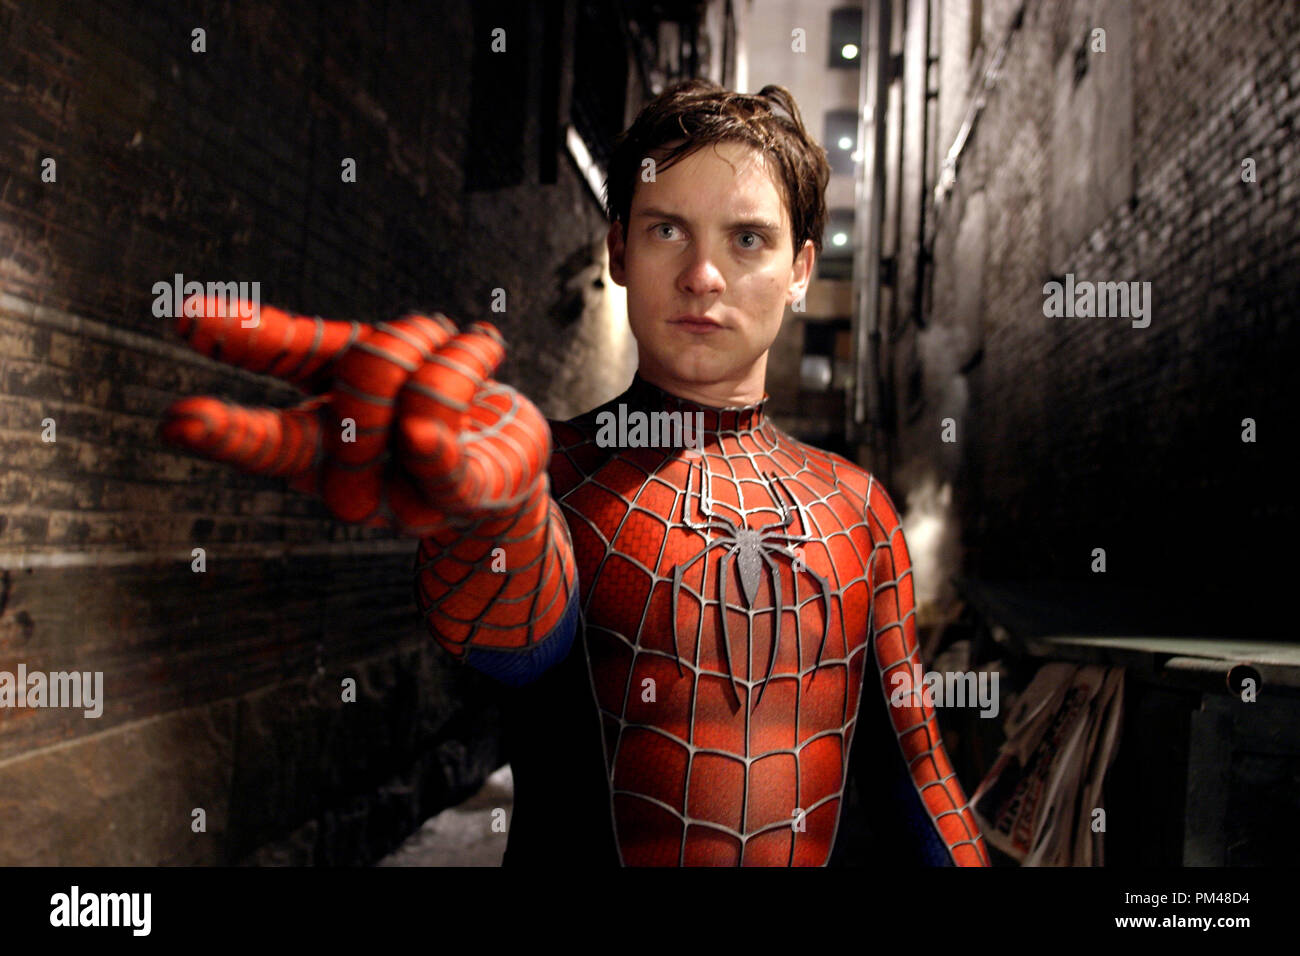 'Spider-Man 2' Tobey Maguire (Peter Parker/Spider-Man)  © 2004 Columbia / Sony Pictures Stock Photo